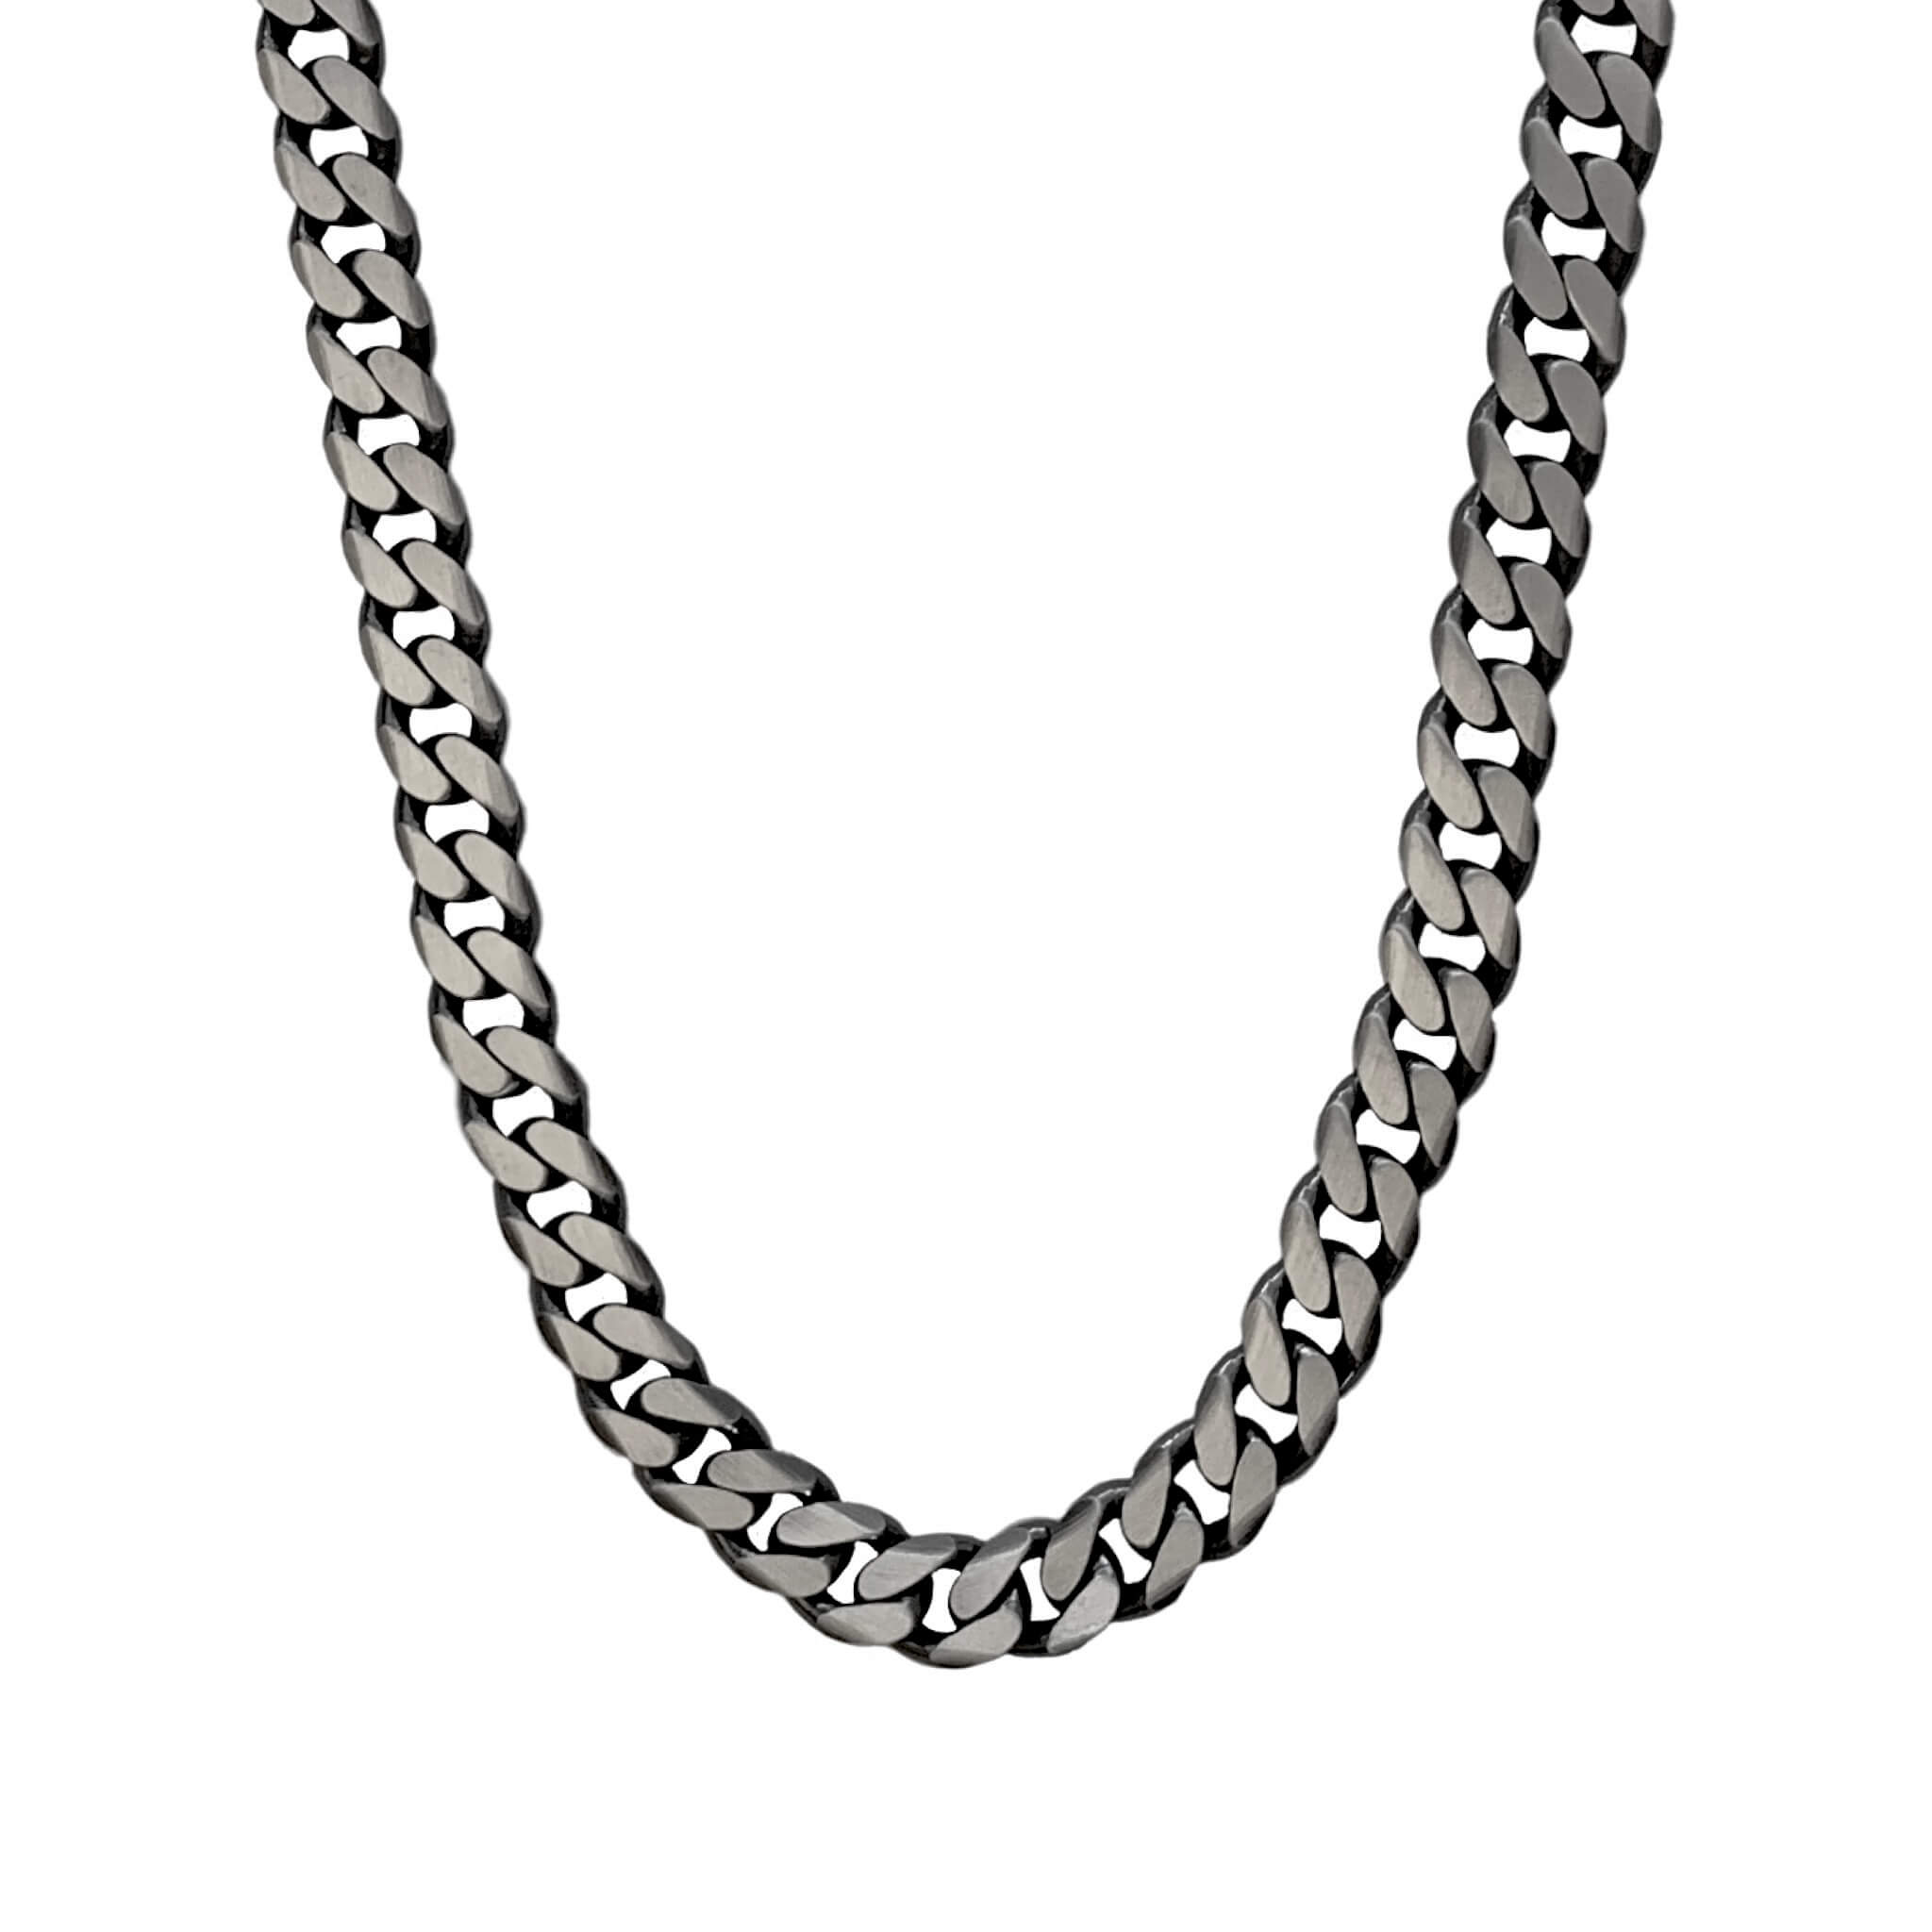 Rebellious Curb Chain Necklace in Gold | Uncommon James